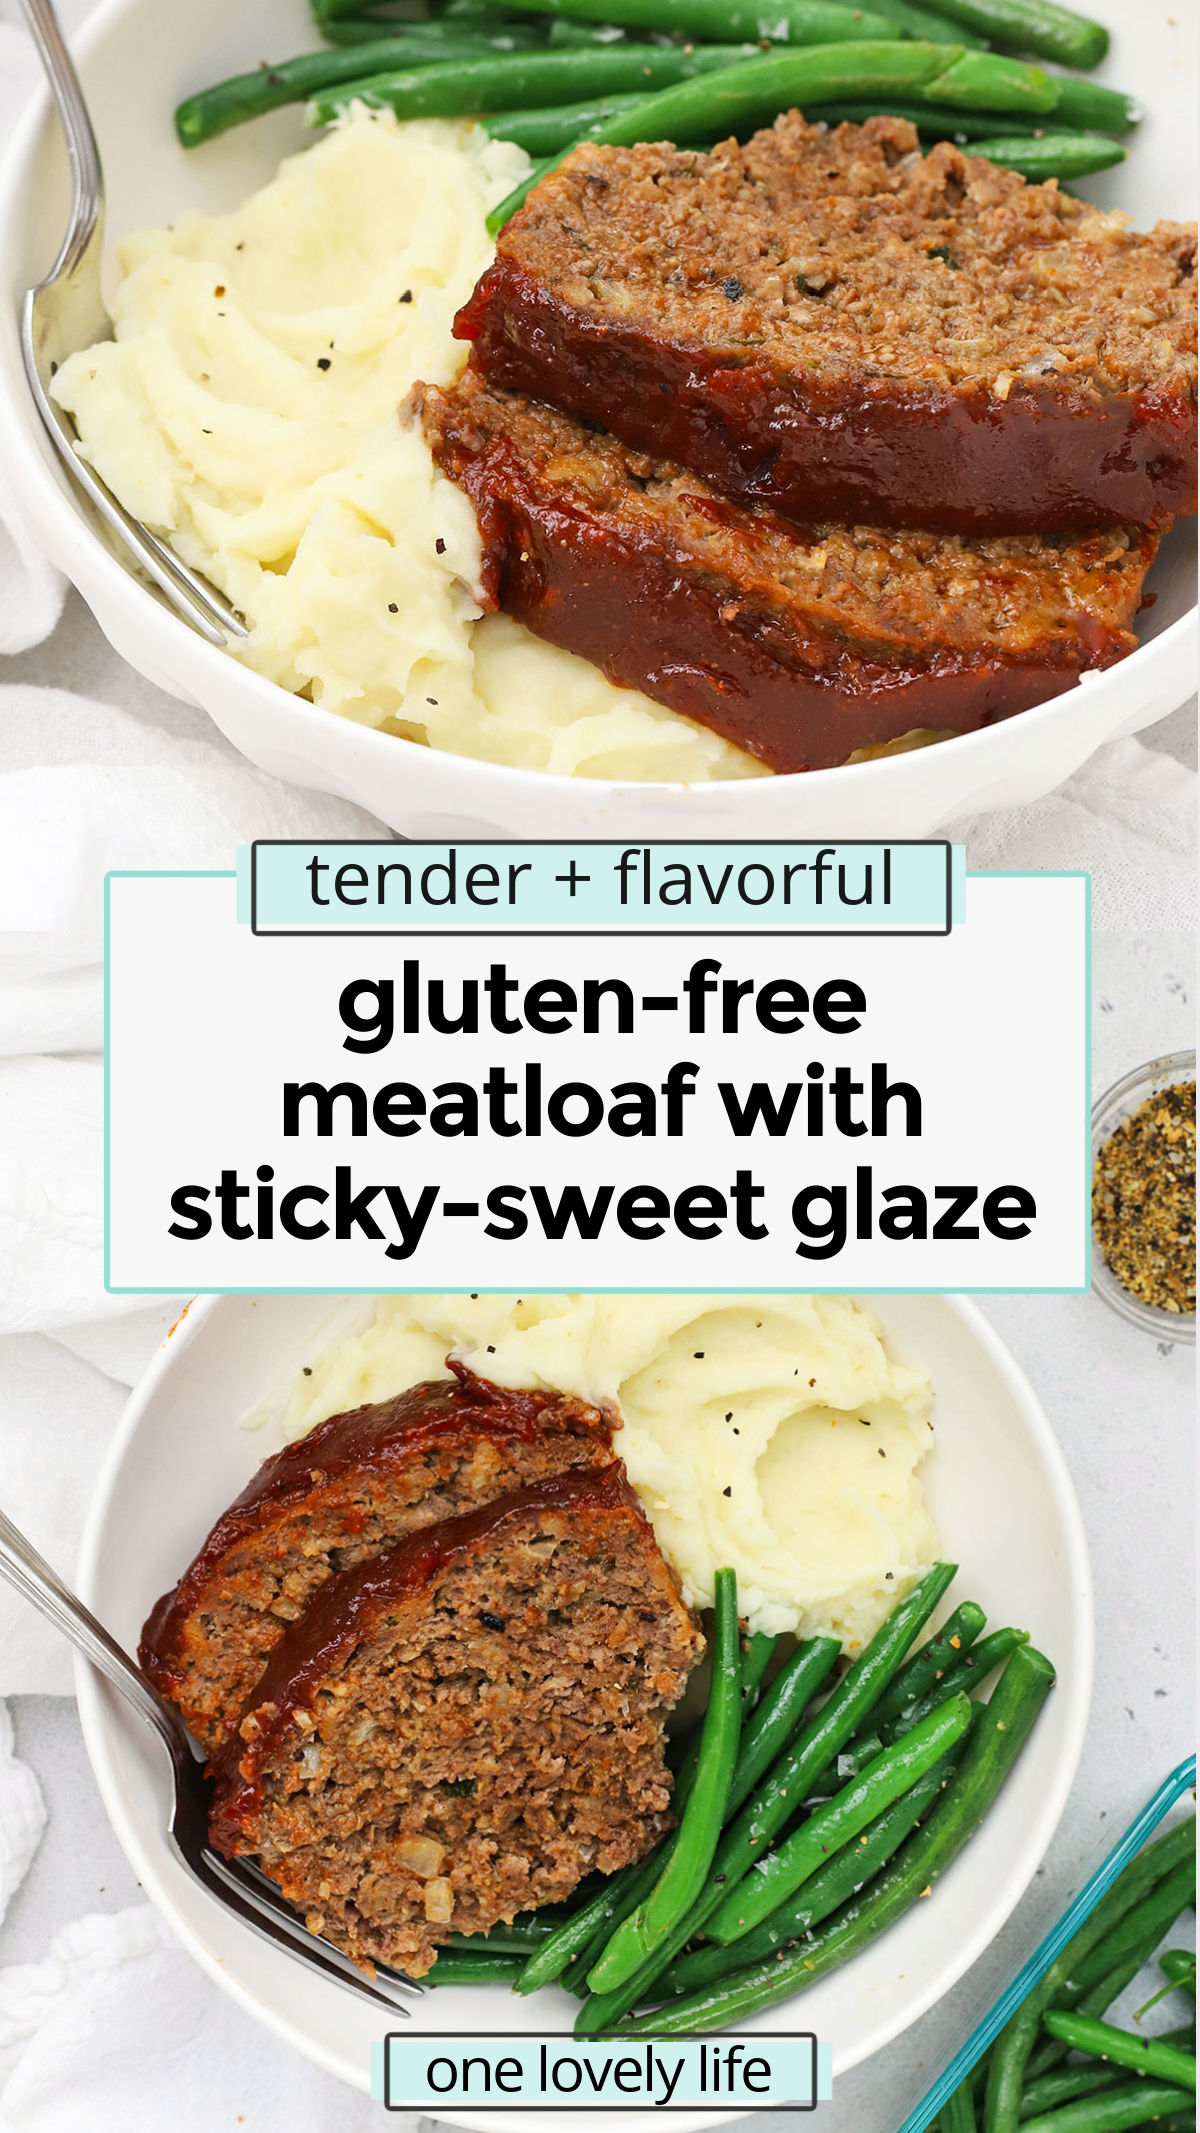 Our easy Gluten-Free Meatloaf recipe has tender texture, plenty of protein, and a yummy sticky sweet glaze that make it a classic! // classic gluten free meatloaf / healthy meatloaf / lean meatloaf / high protein dinner ideas / gluten free protein dinner / easy meatloaf glaze / the best meatloaf glaze / meatloaf glaze recipe / thick meatloaf glaze / gluten free dinner / gluten free comfort food / gluten free meat and potatoes dinner